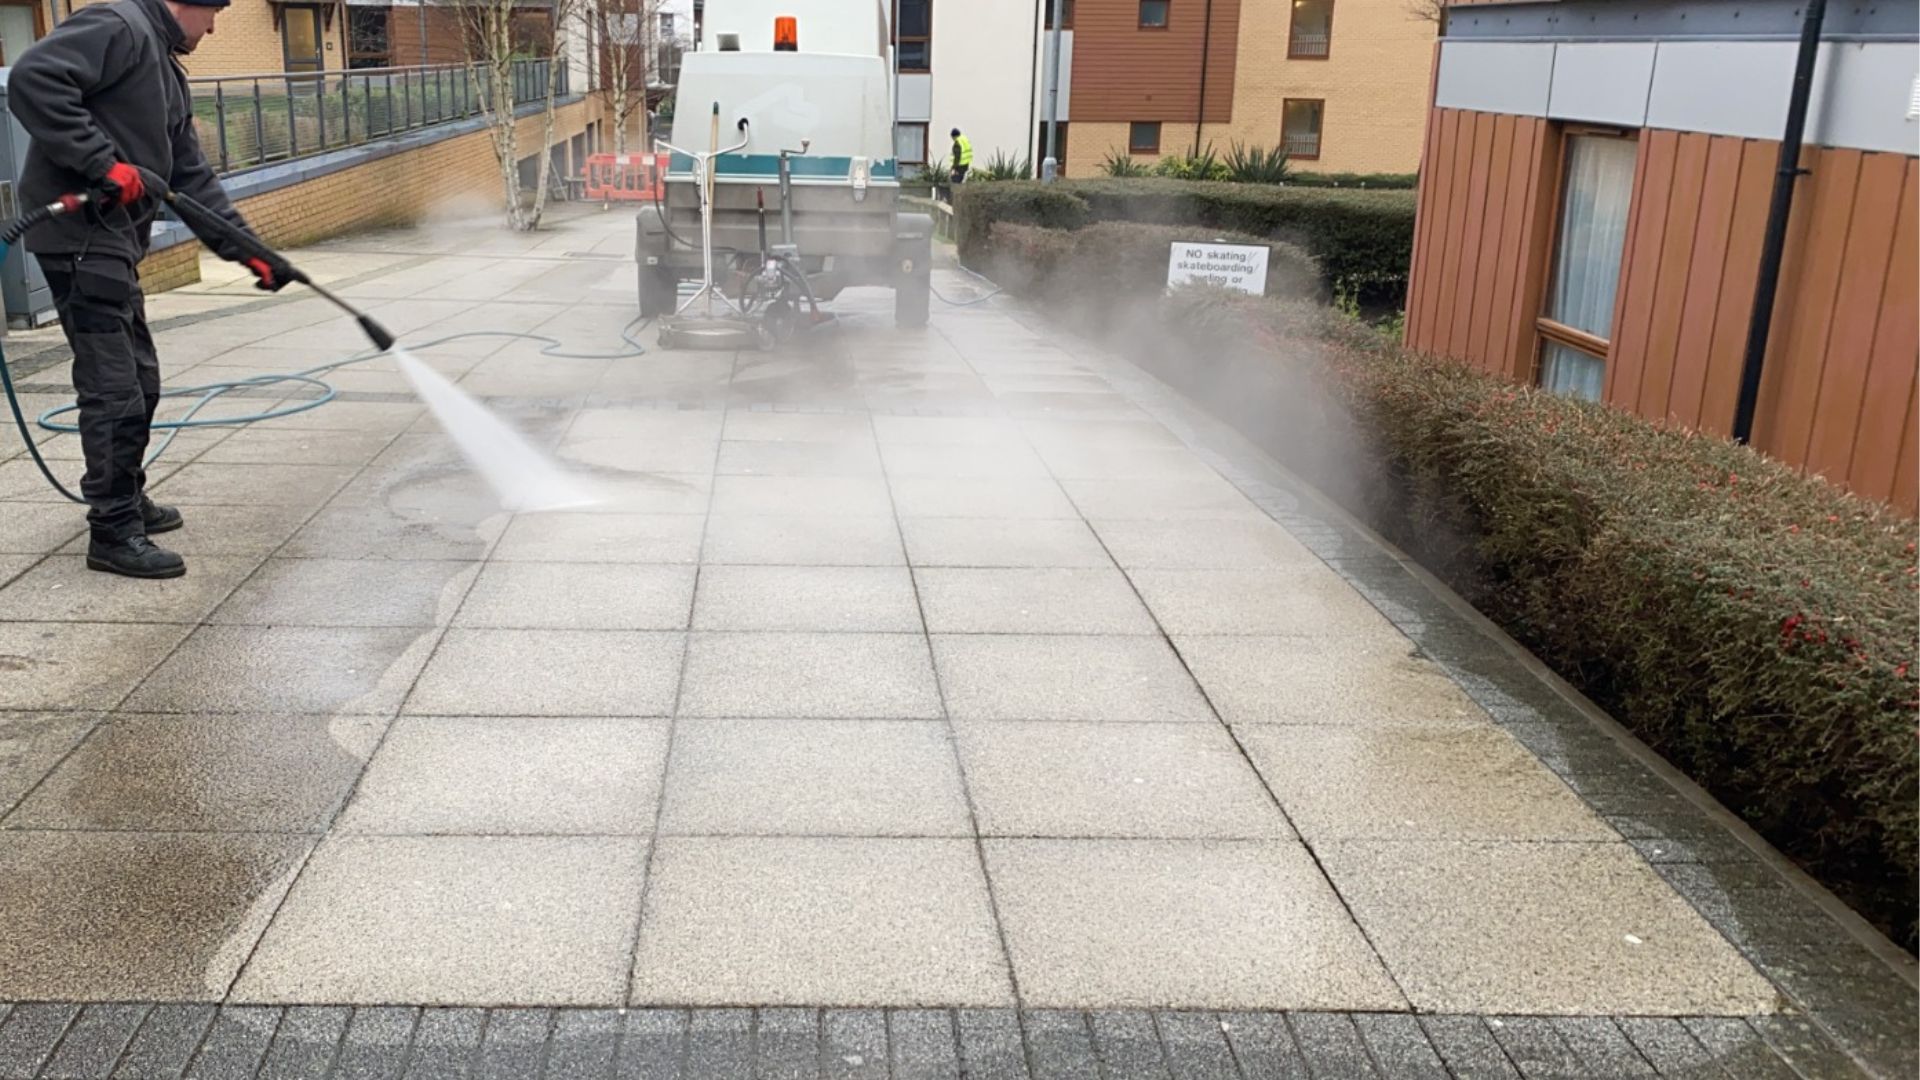 pavement cleaning using a pressure wasjer to help illustrate Vinci's stone cleaning services.